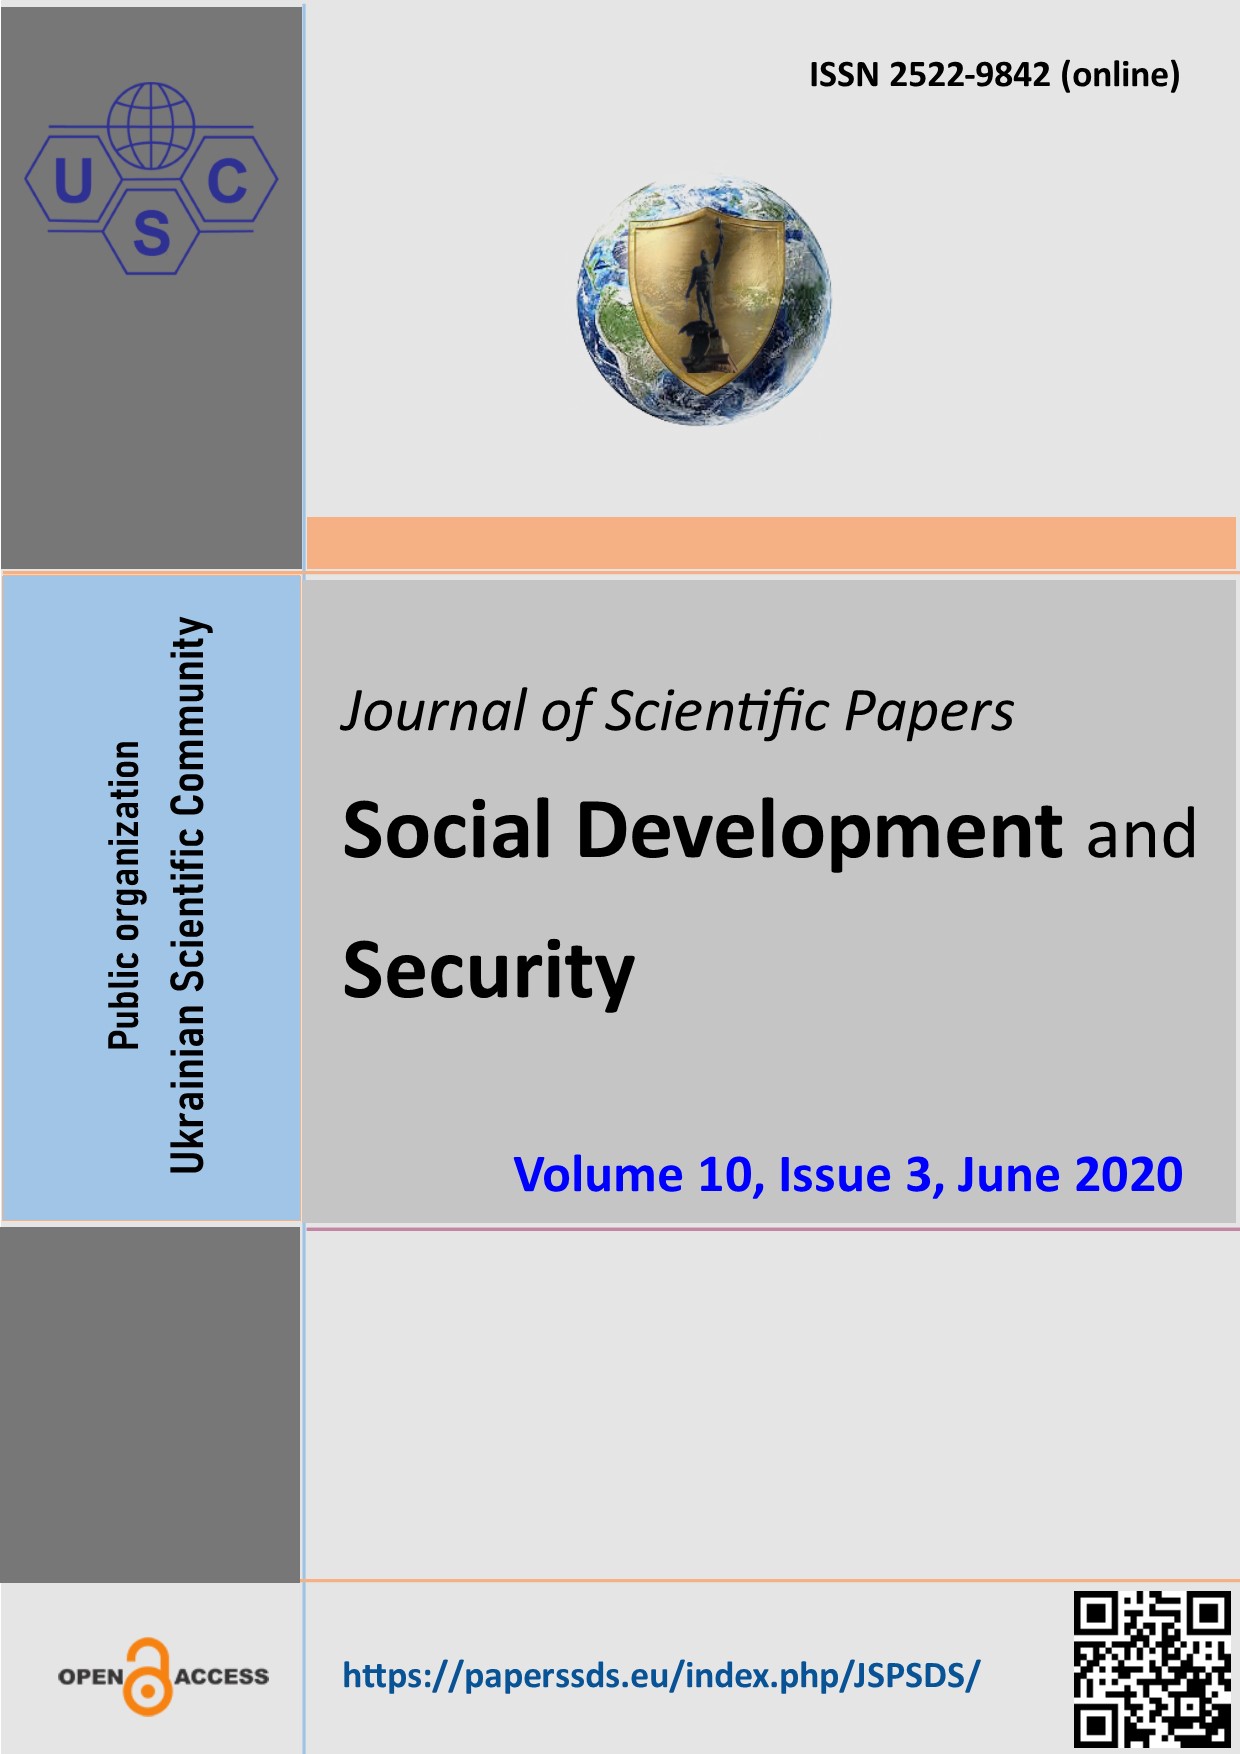 Social Development and Security